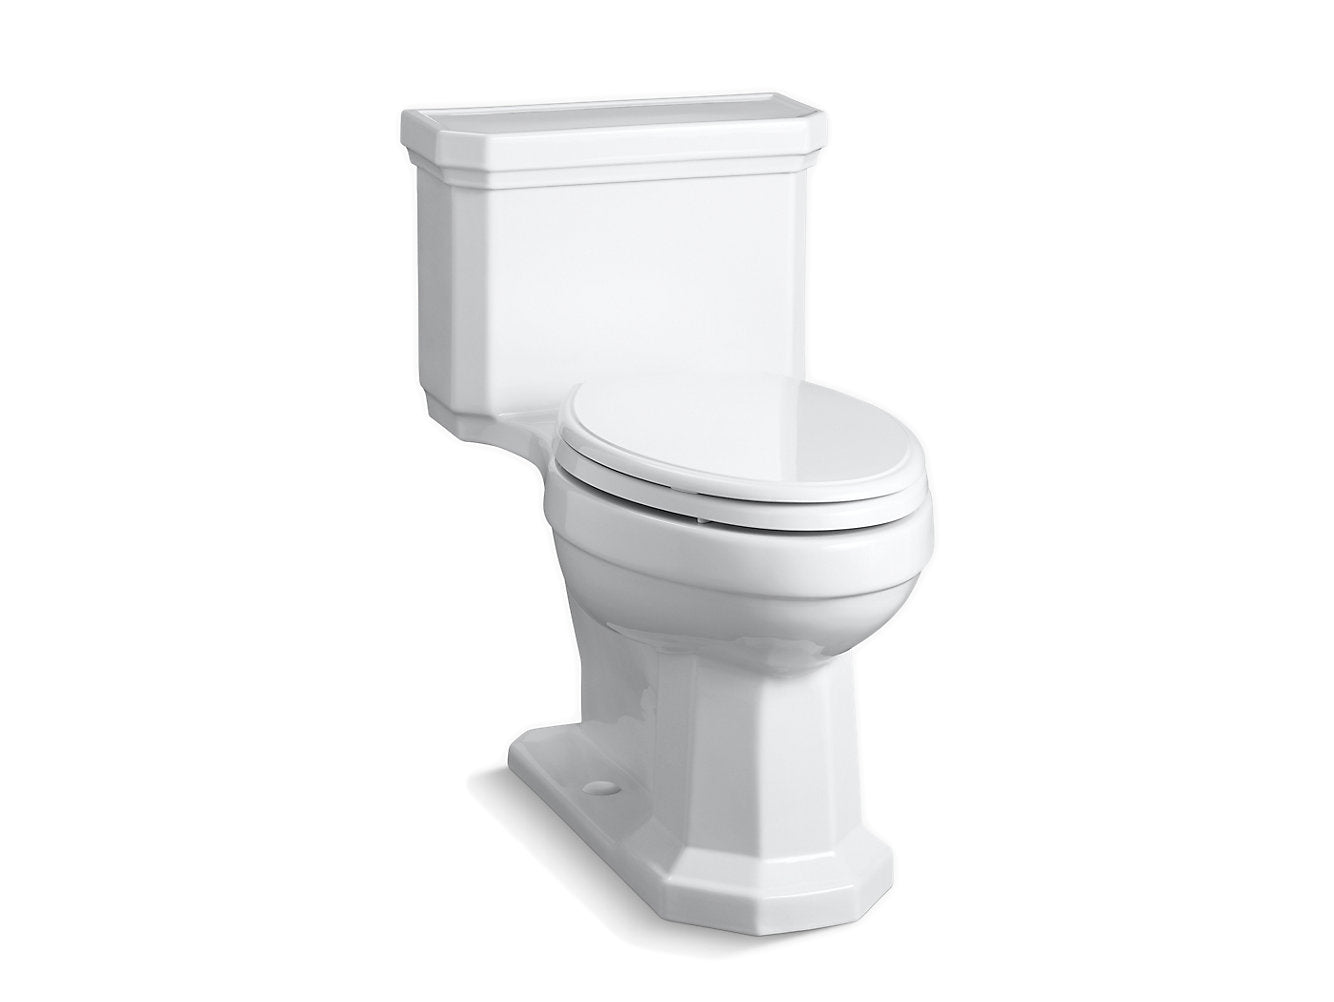 Kohler Kathryn Comfort Height One Piece Compact Elongated 1.28 GPF Chair Height Toilet With Right Hand Trip Lever and Slow Close Seat - White